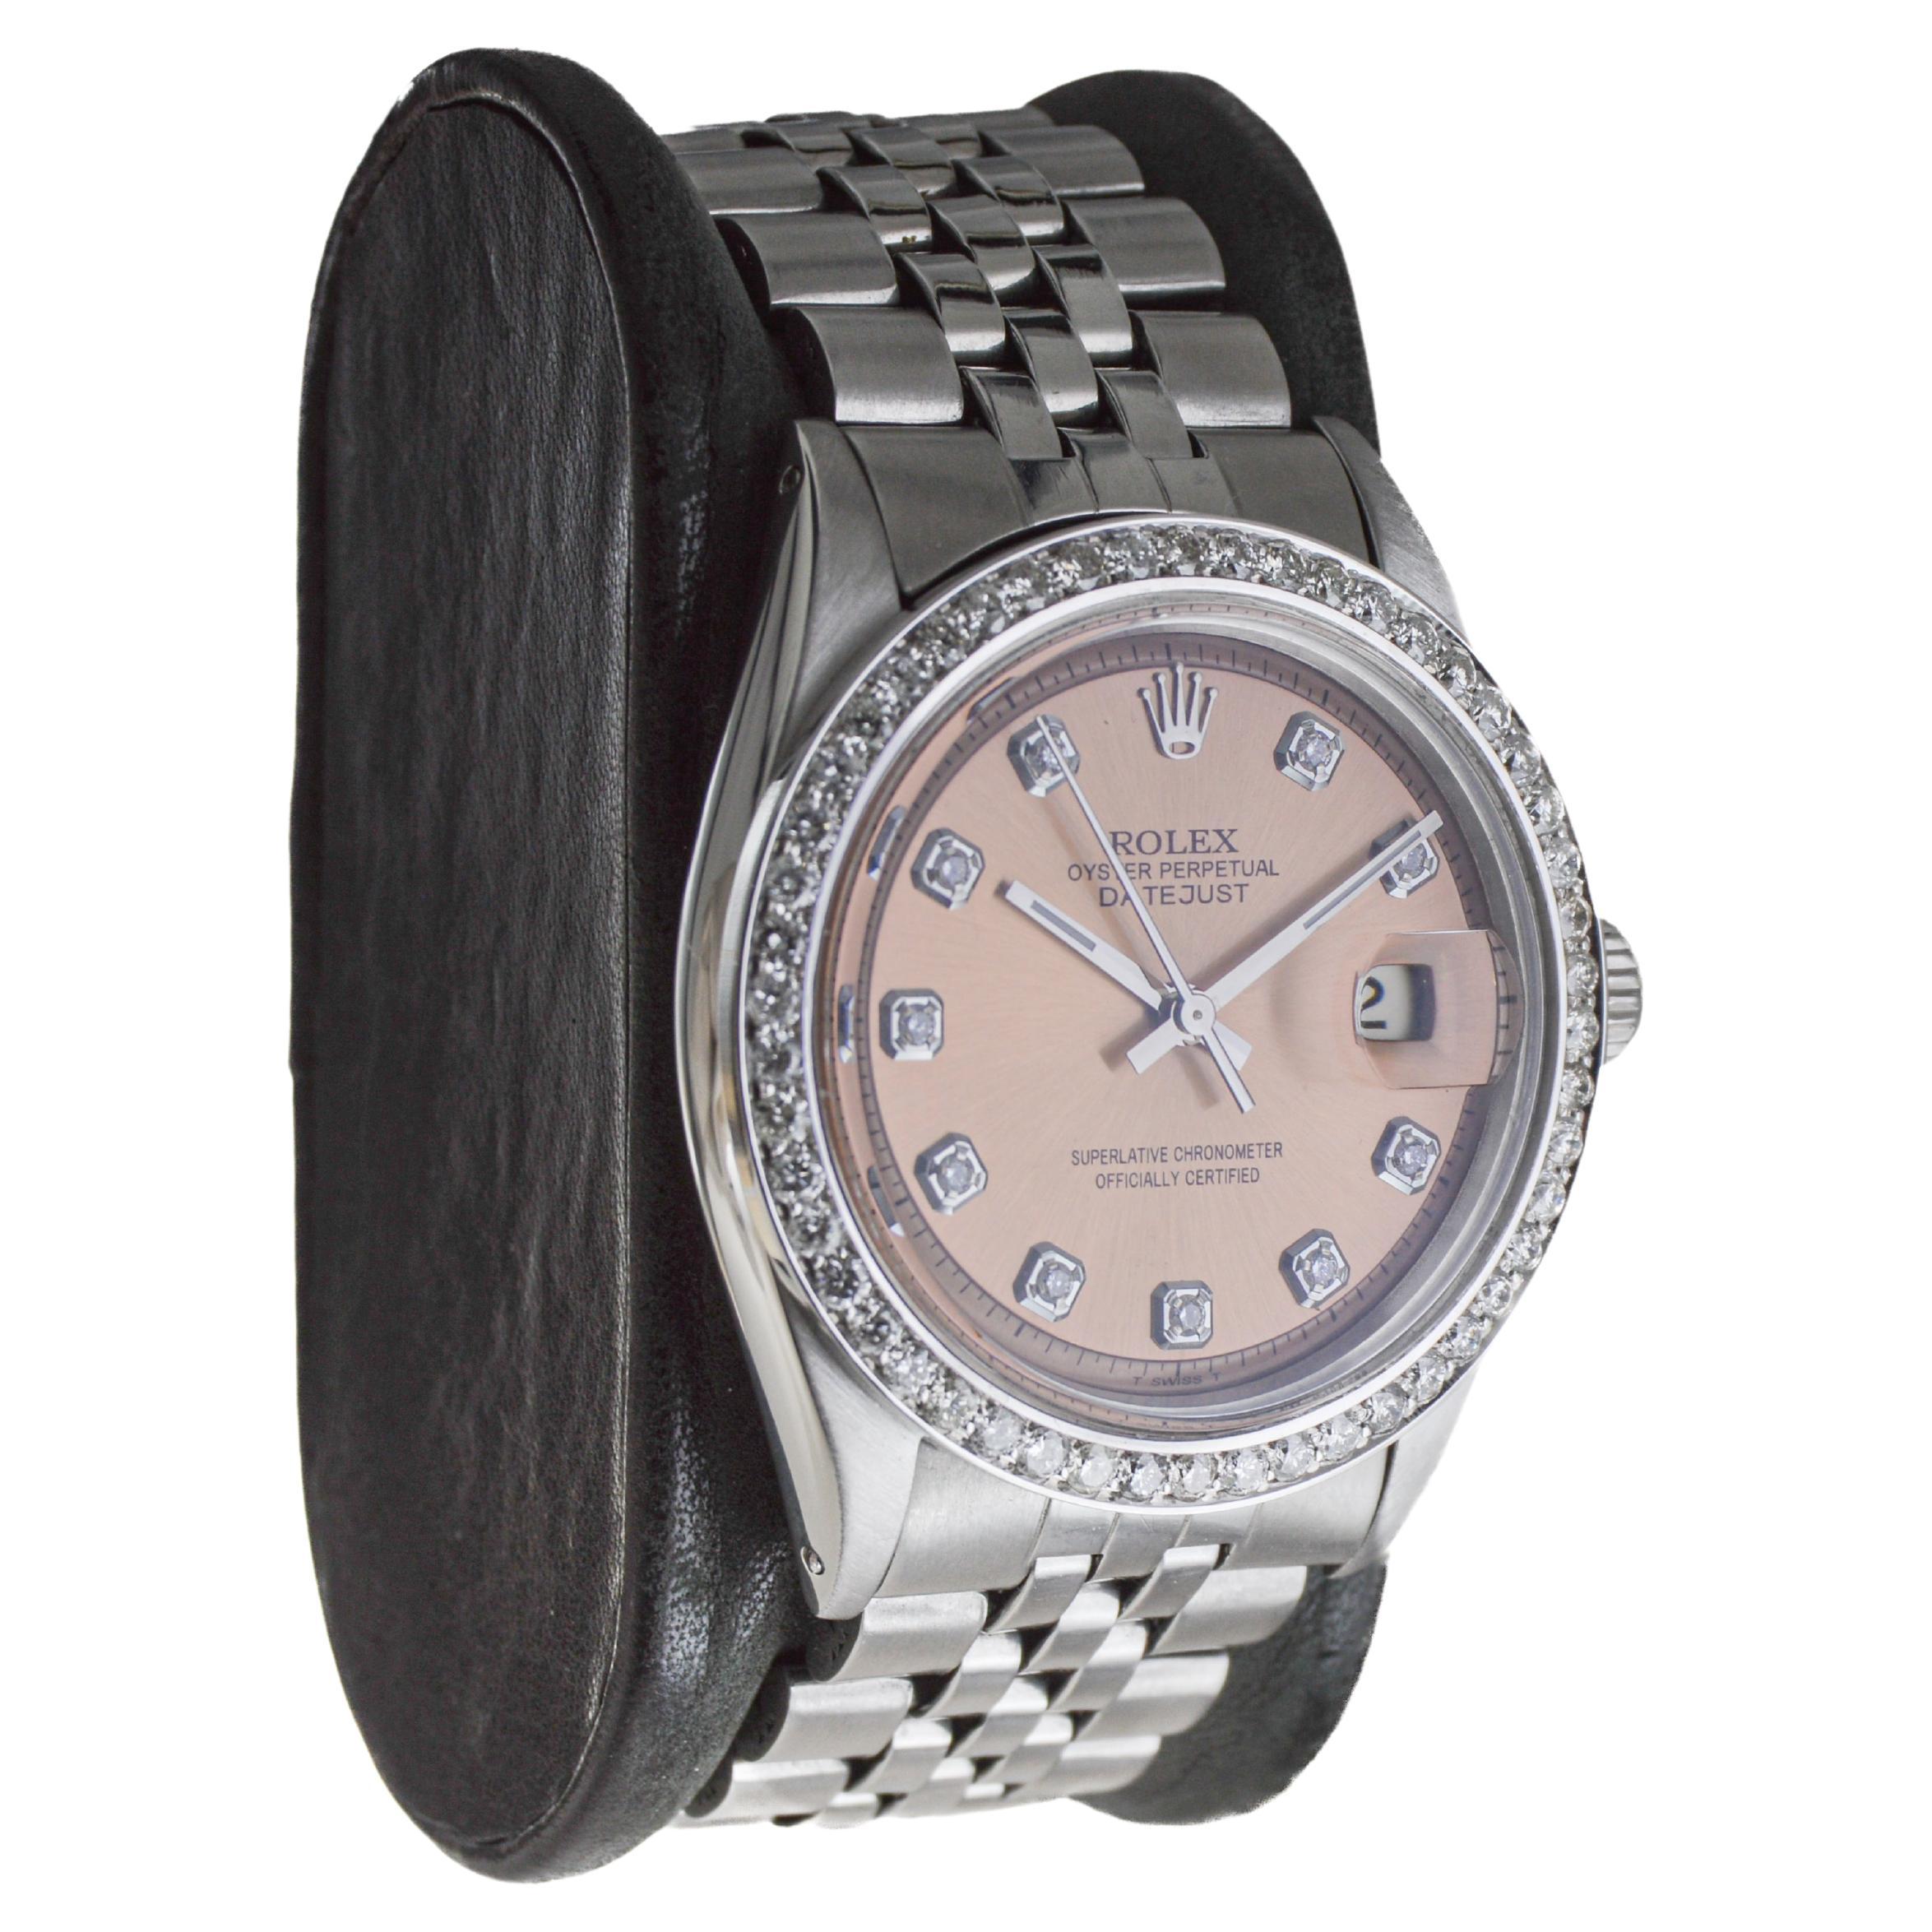 FACTORY / HOUSE: Rolex Watch Company
STYLE / REFERENCE: Datejust / Reference 1603
METAL / MATERIAL: Stainless Steel
CIRCA / YEAR: 1970's
DIMENSIONS / SIZE:  Length 44mm X Diameter 36mm
MOVEMENT / CALIBER: Perpetual Winding / 26 Jewels / Caliber